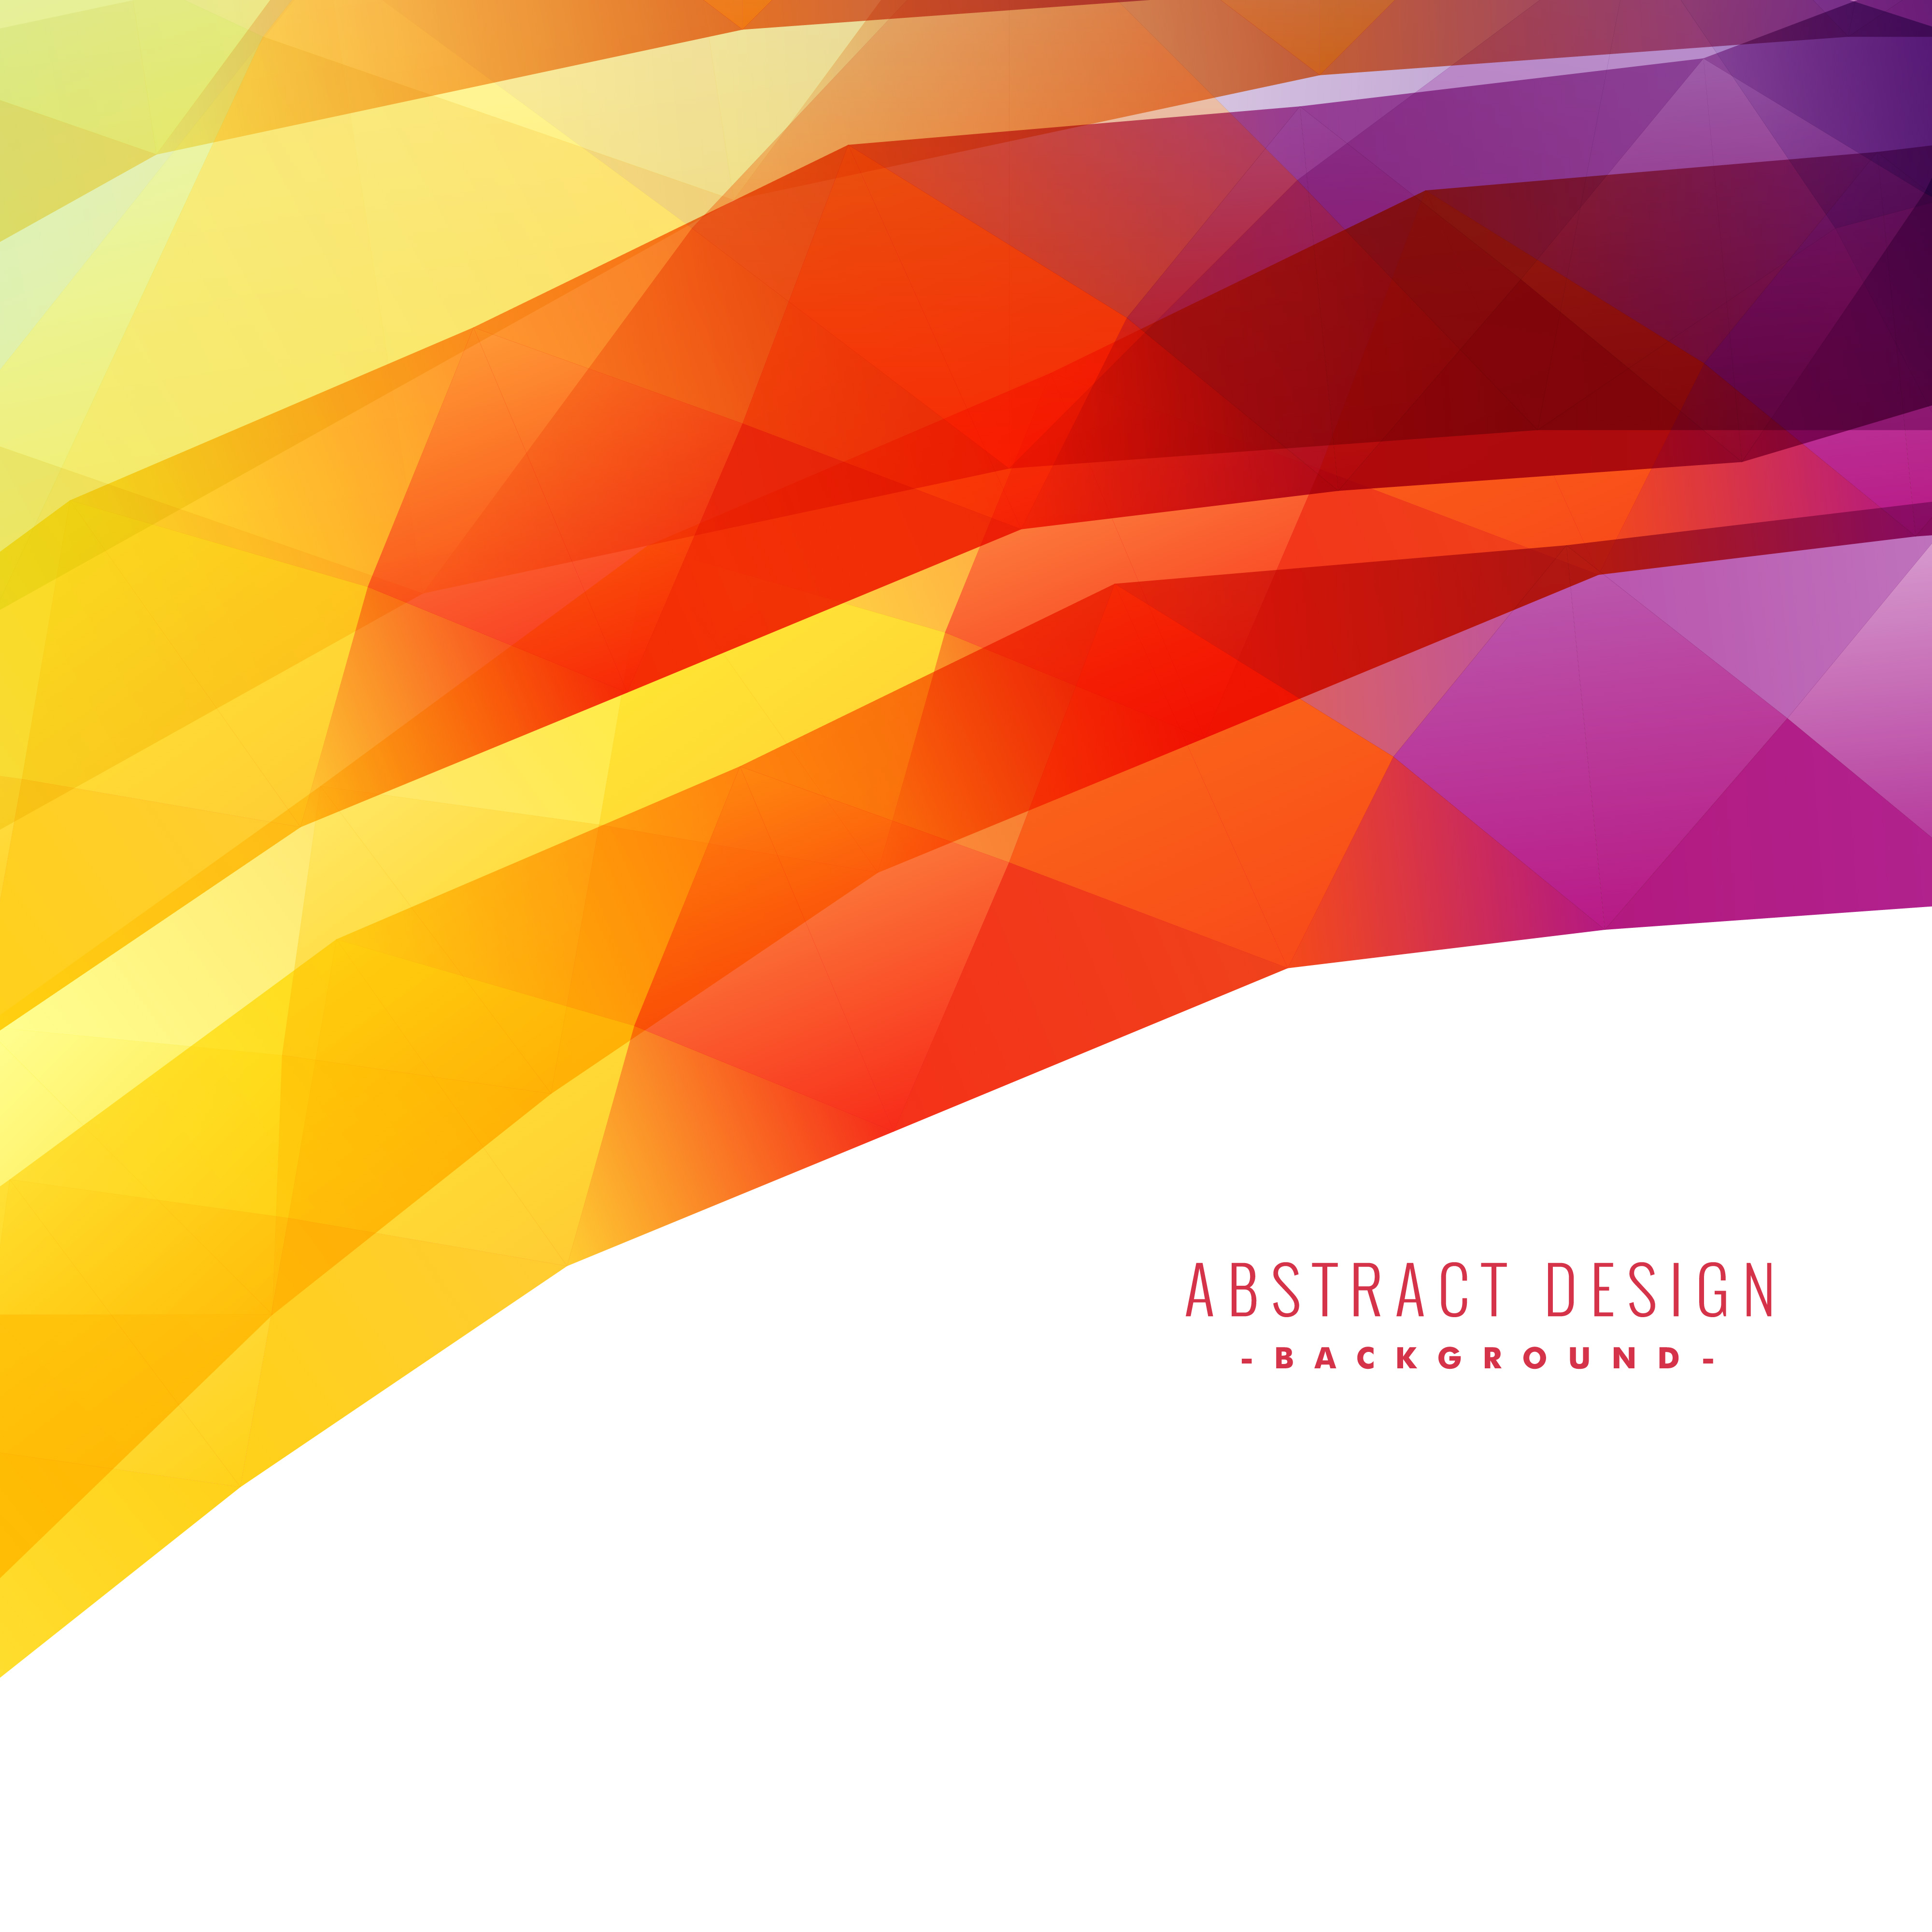 Abstract Background Designs Free Vector Art - (54309 Free Downloads)